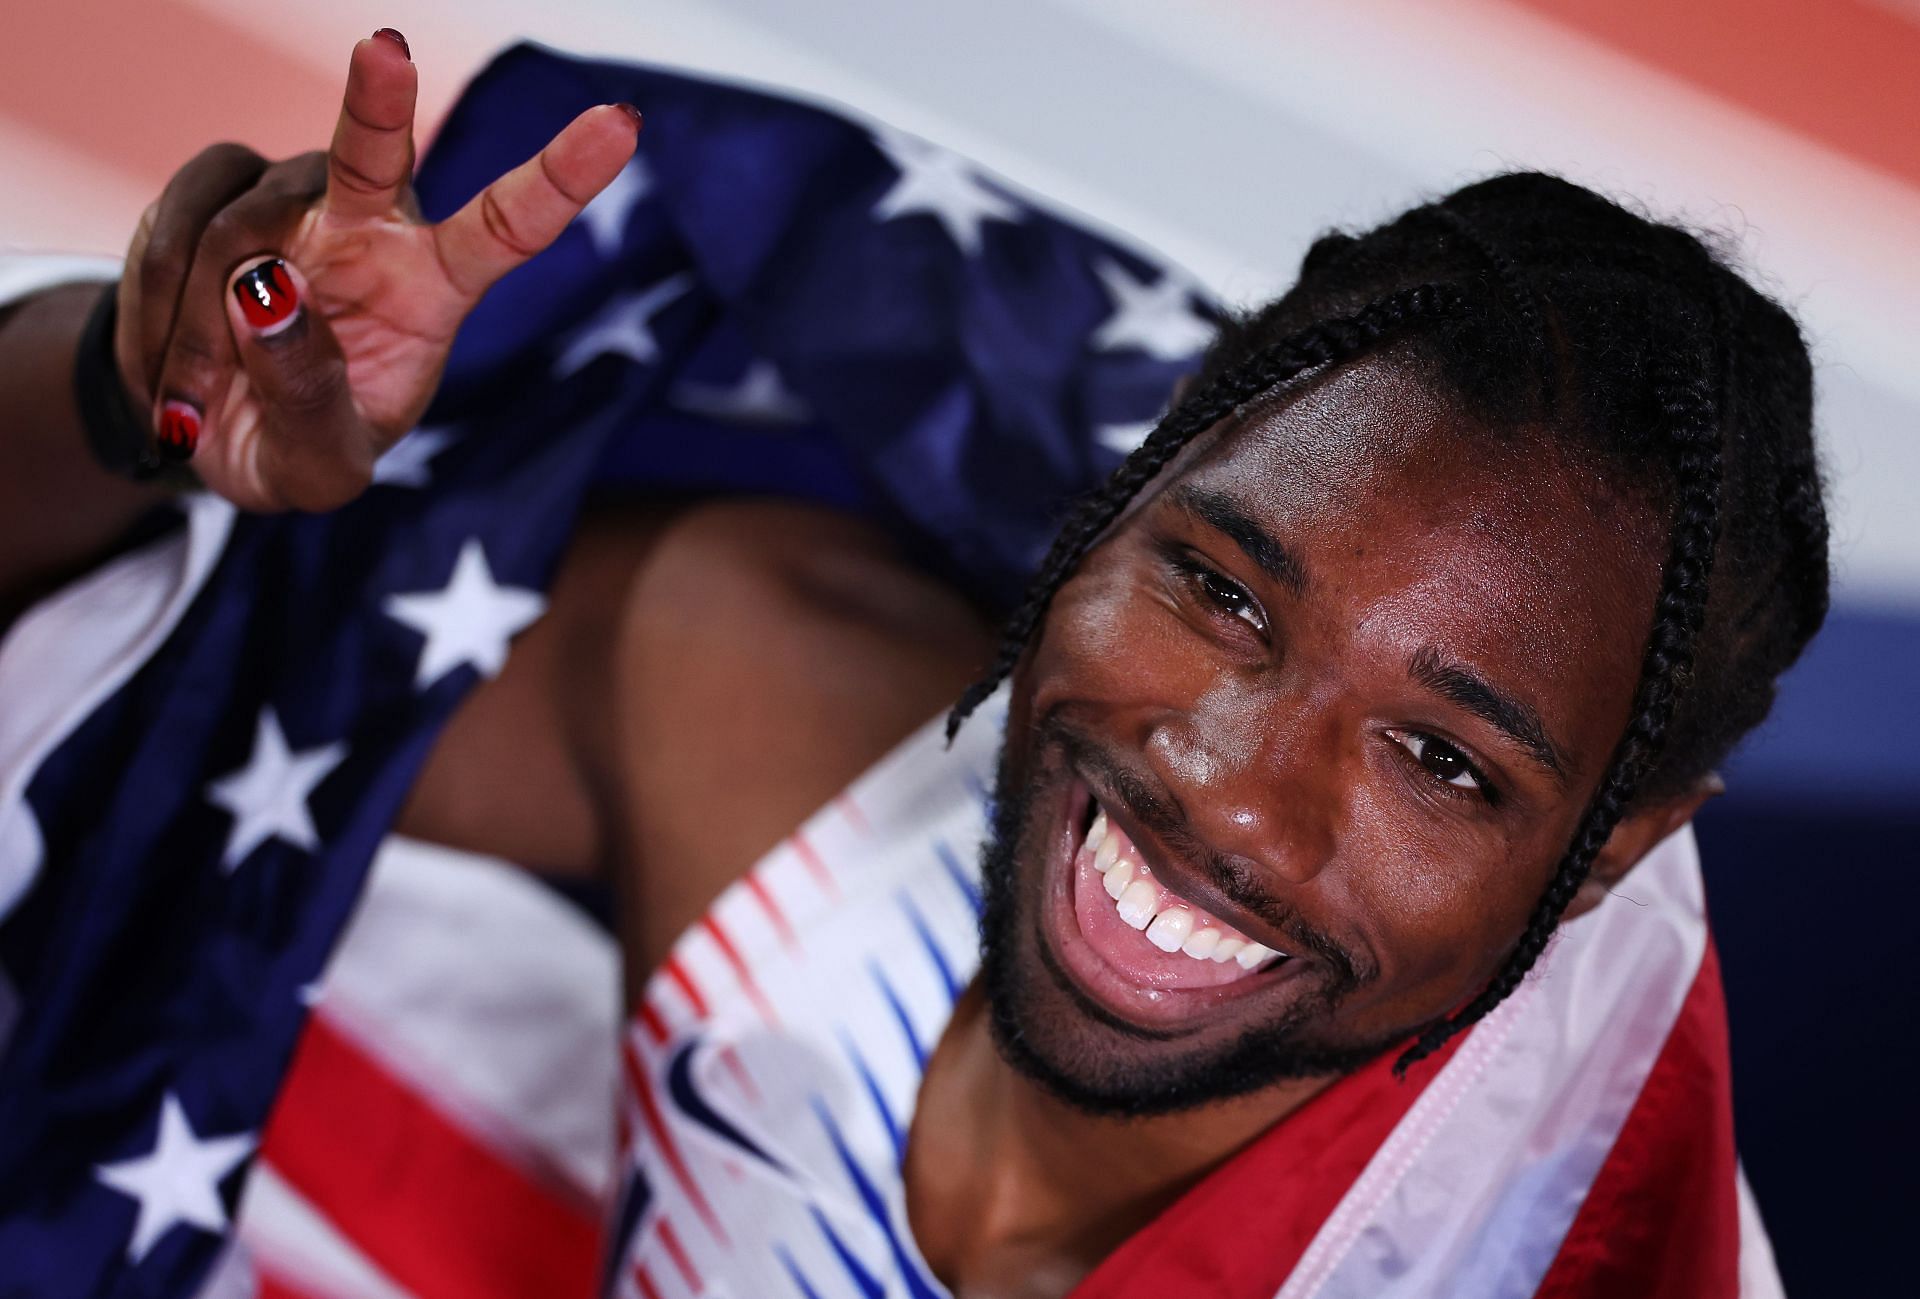 Noah Lyles fixes his gaze on four Olympic gold medals.